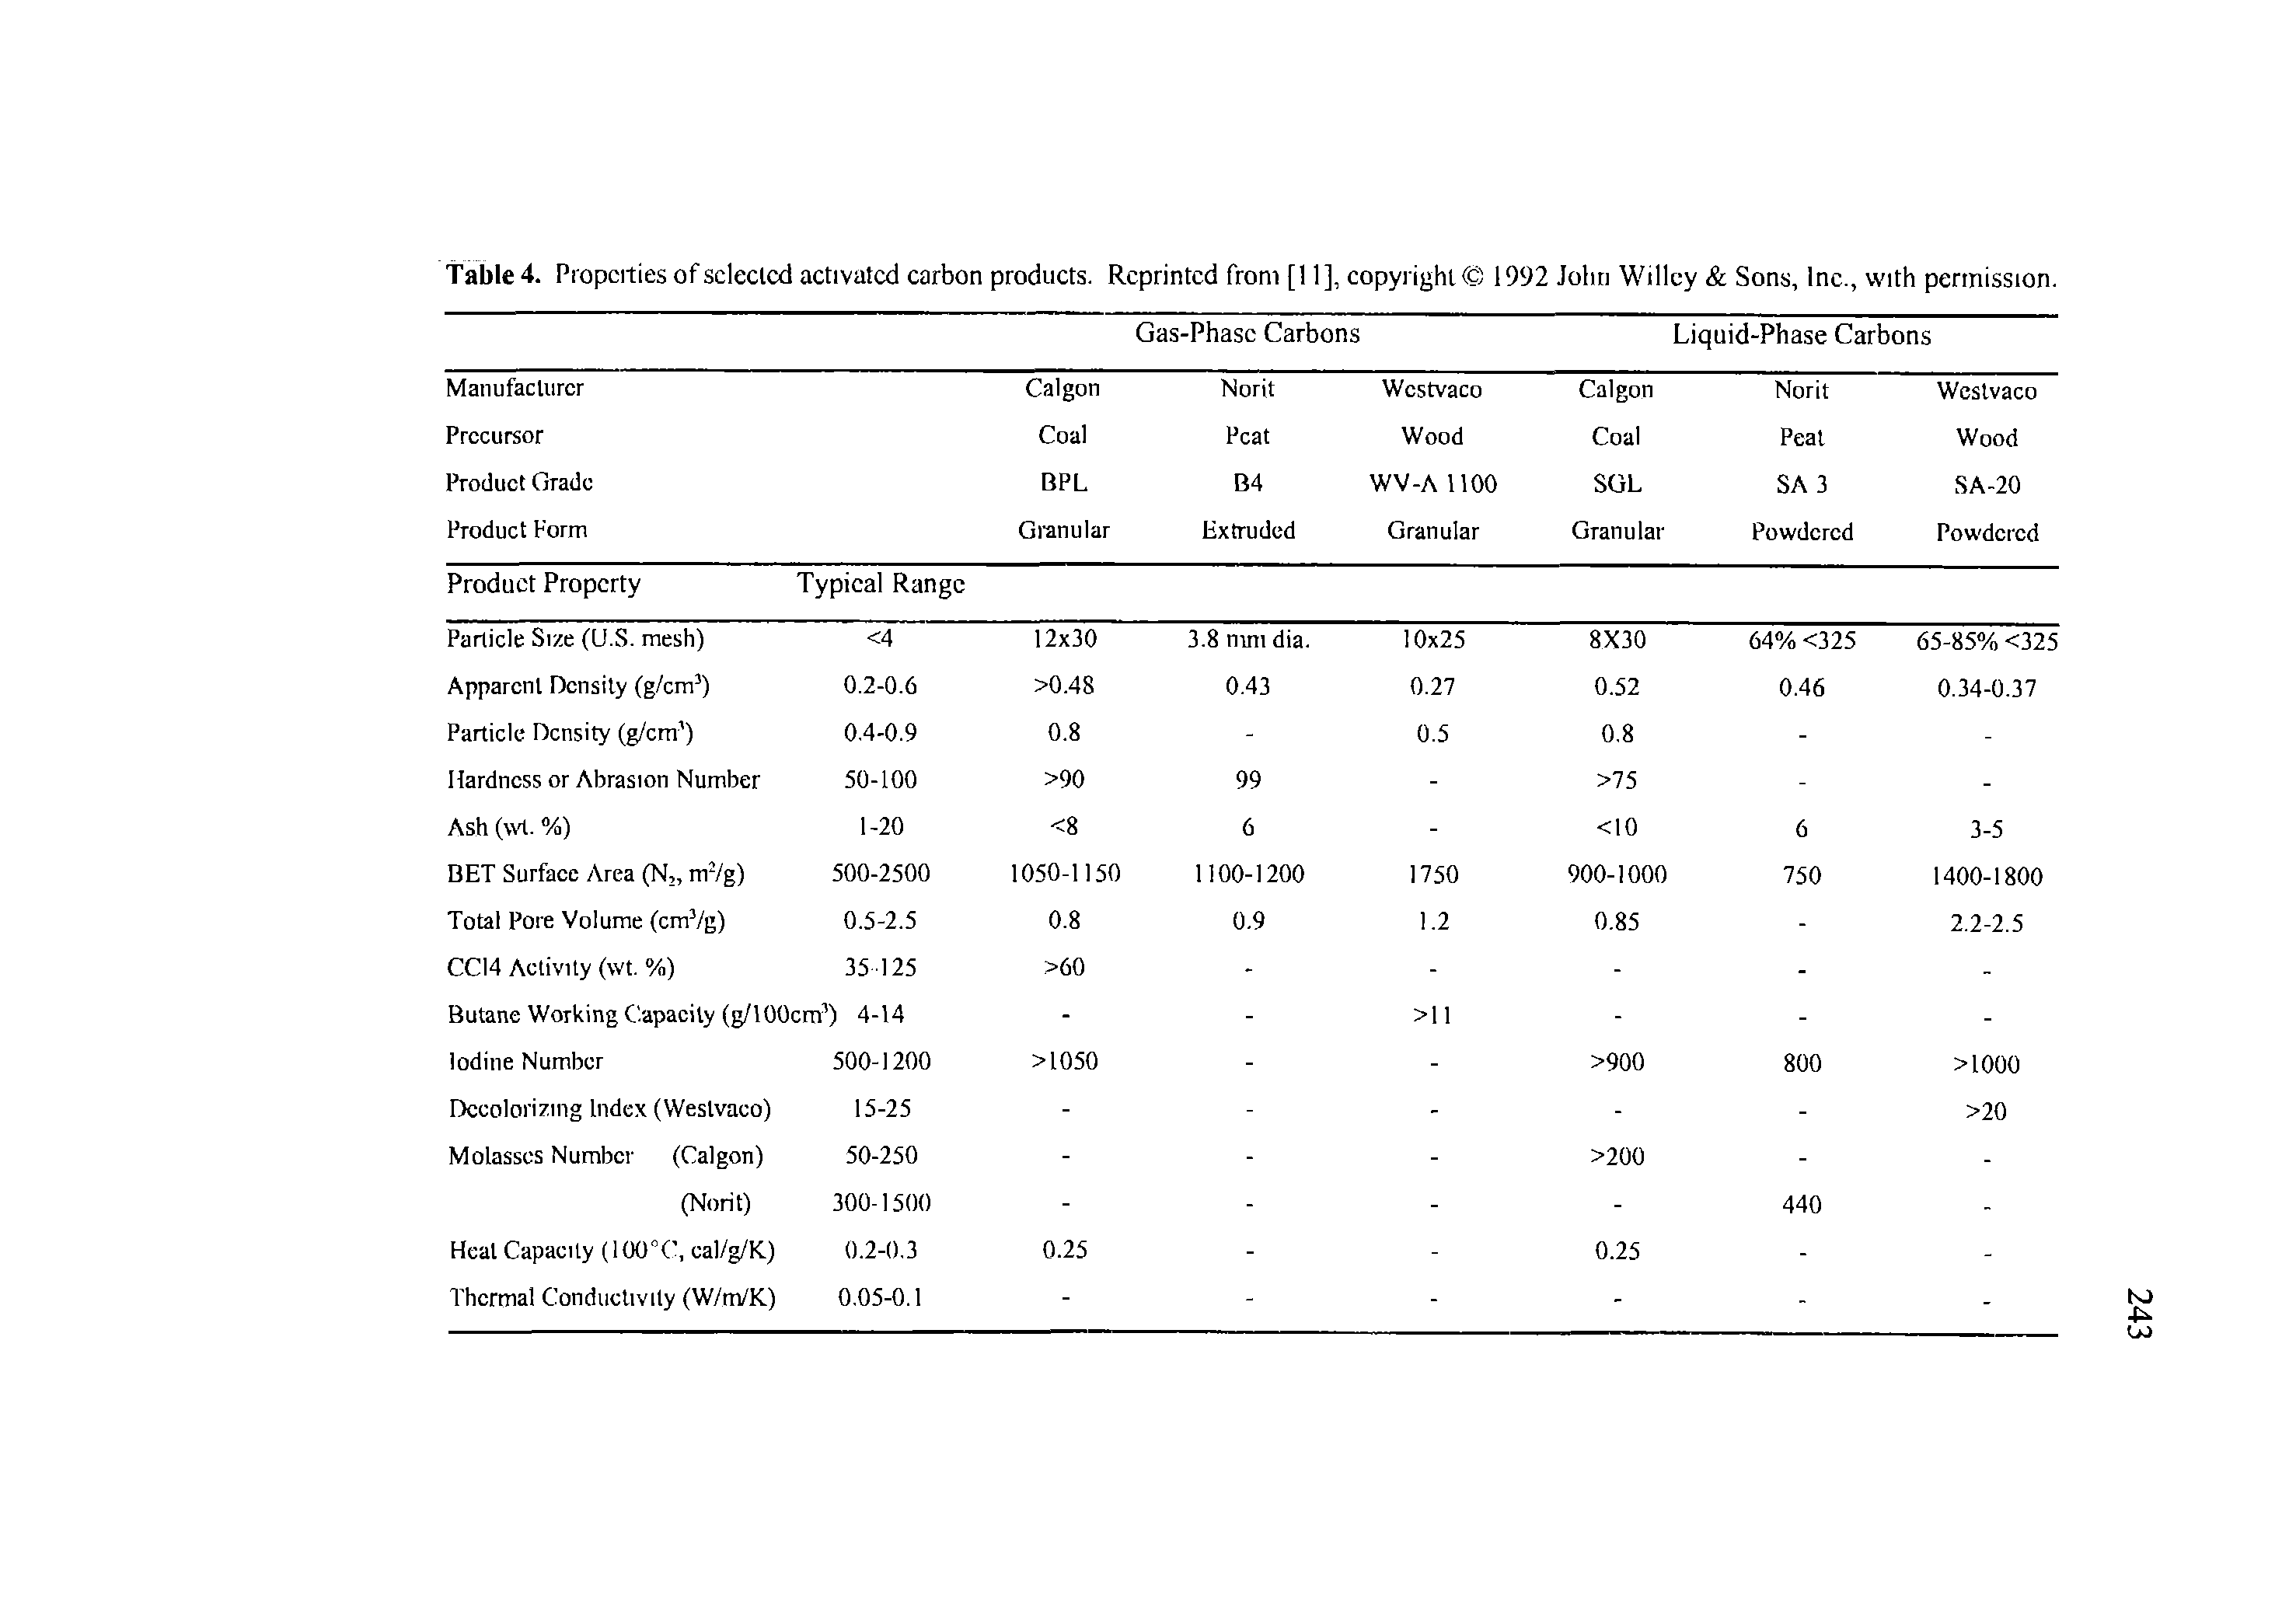 Table 4. Properties of selected activated carbon products. Reprinted from [11], copyright (c) 1992 John Willey Sons, Inc., with permission.